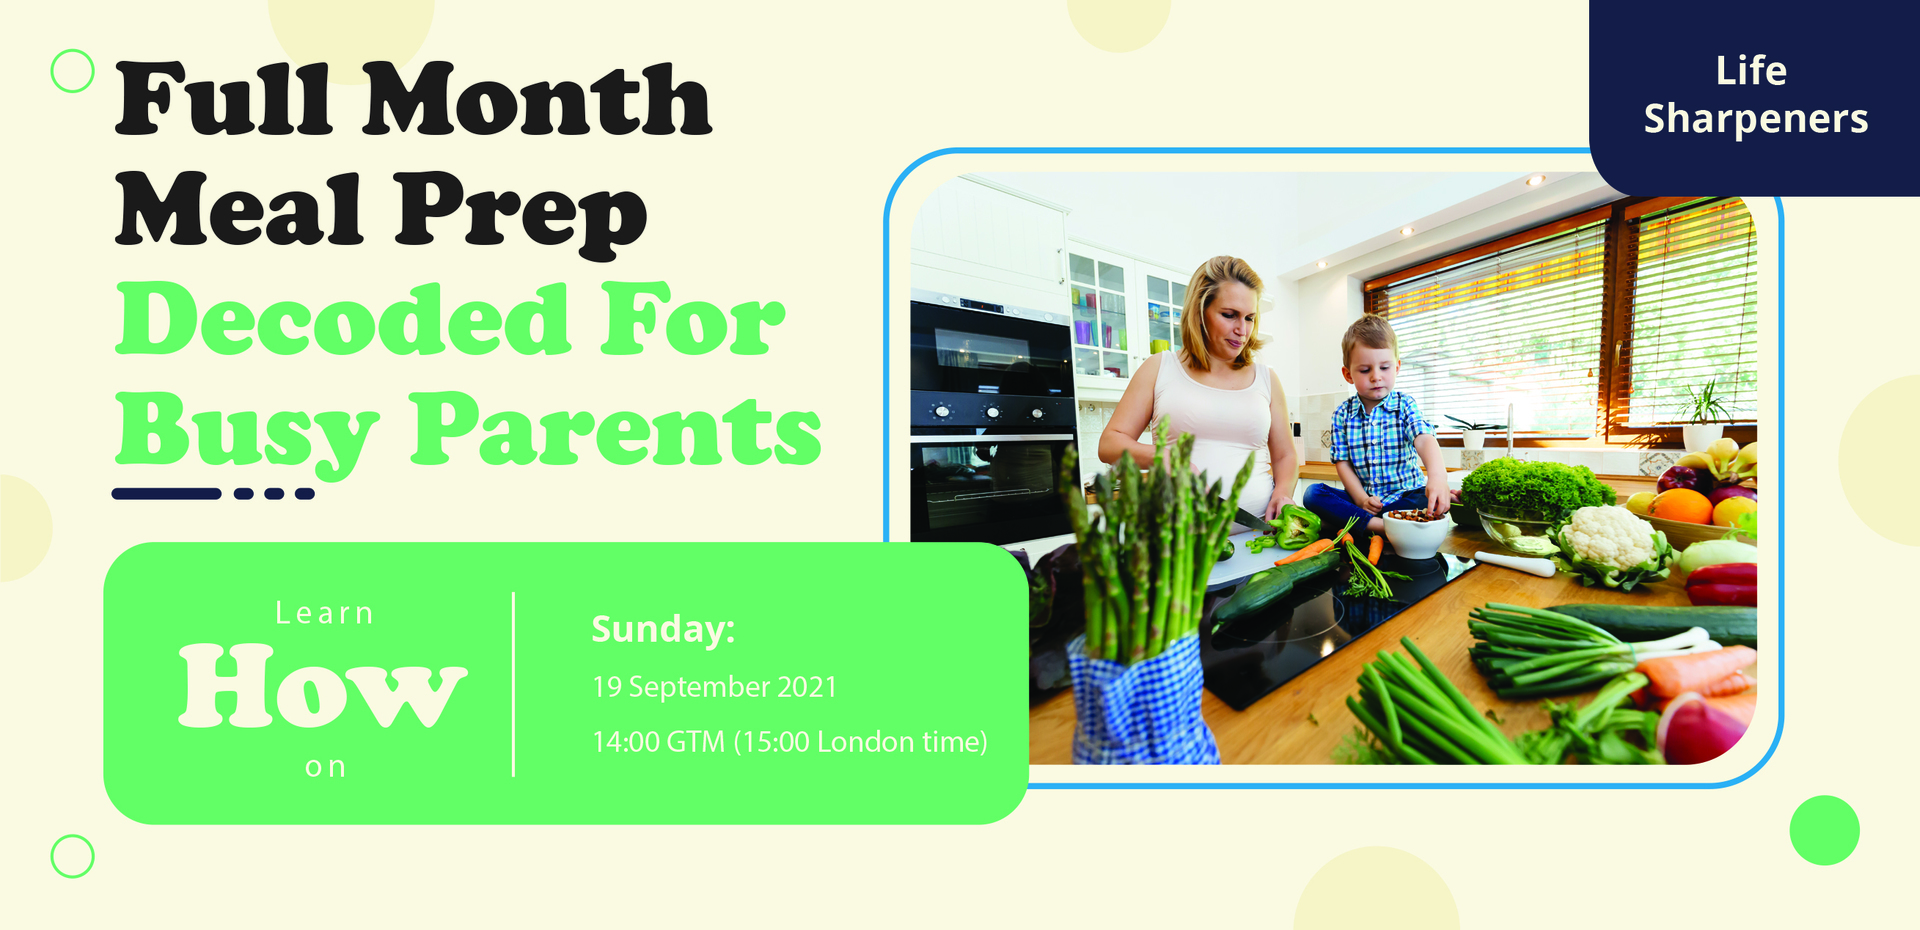 Full Month Meal Prep Decoded For Busy Parents, Online Event